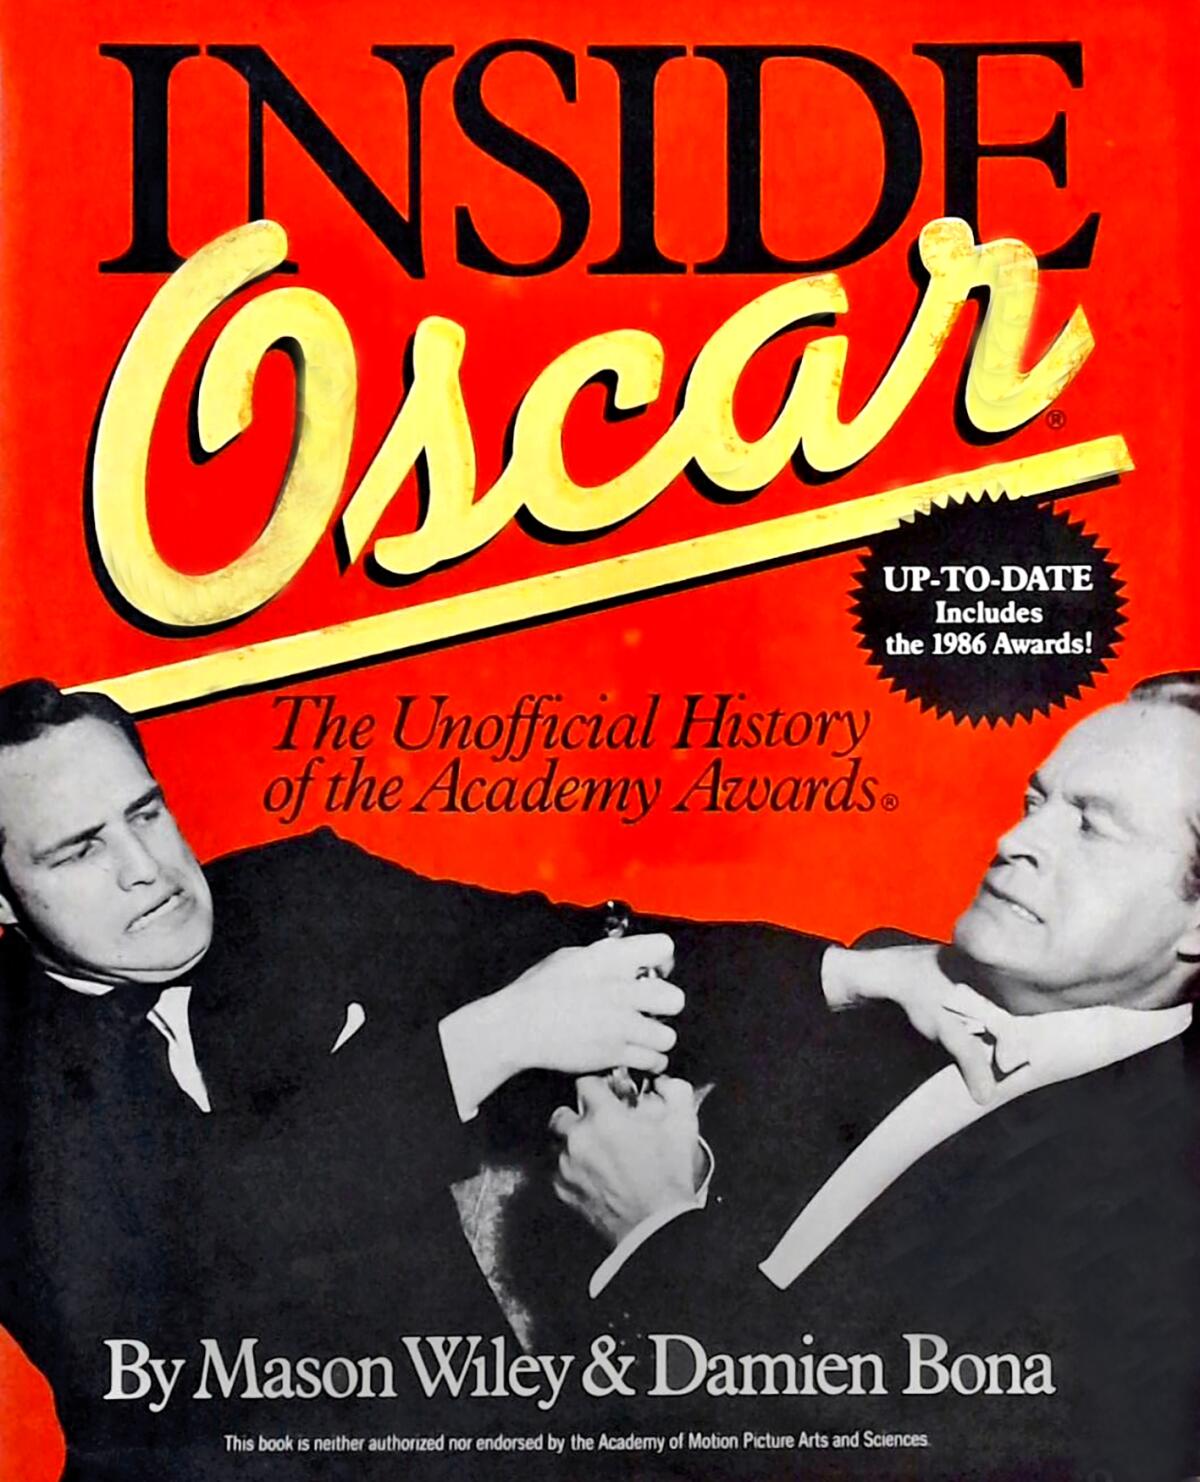 "Inside Oscar: The Unofficial History of the Academy Awards" by Mason Wiley and Damien Bona, 1987